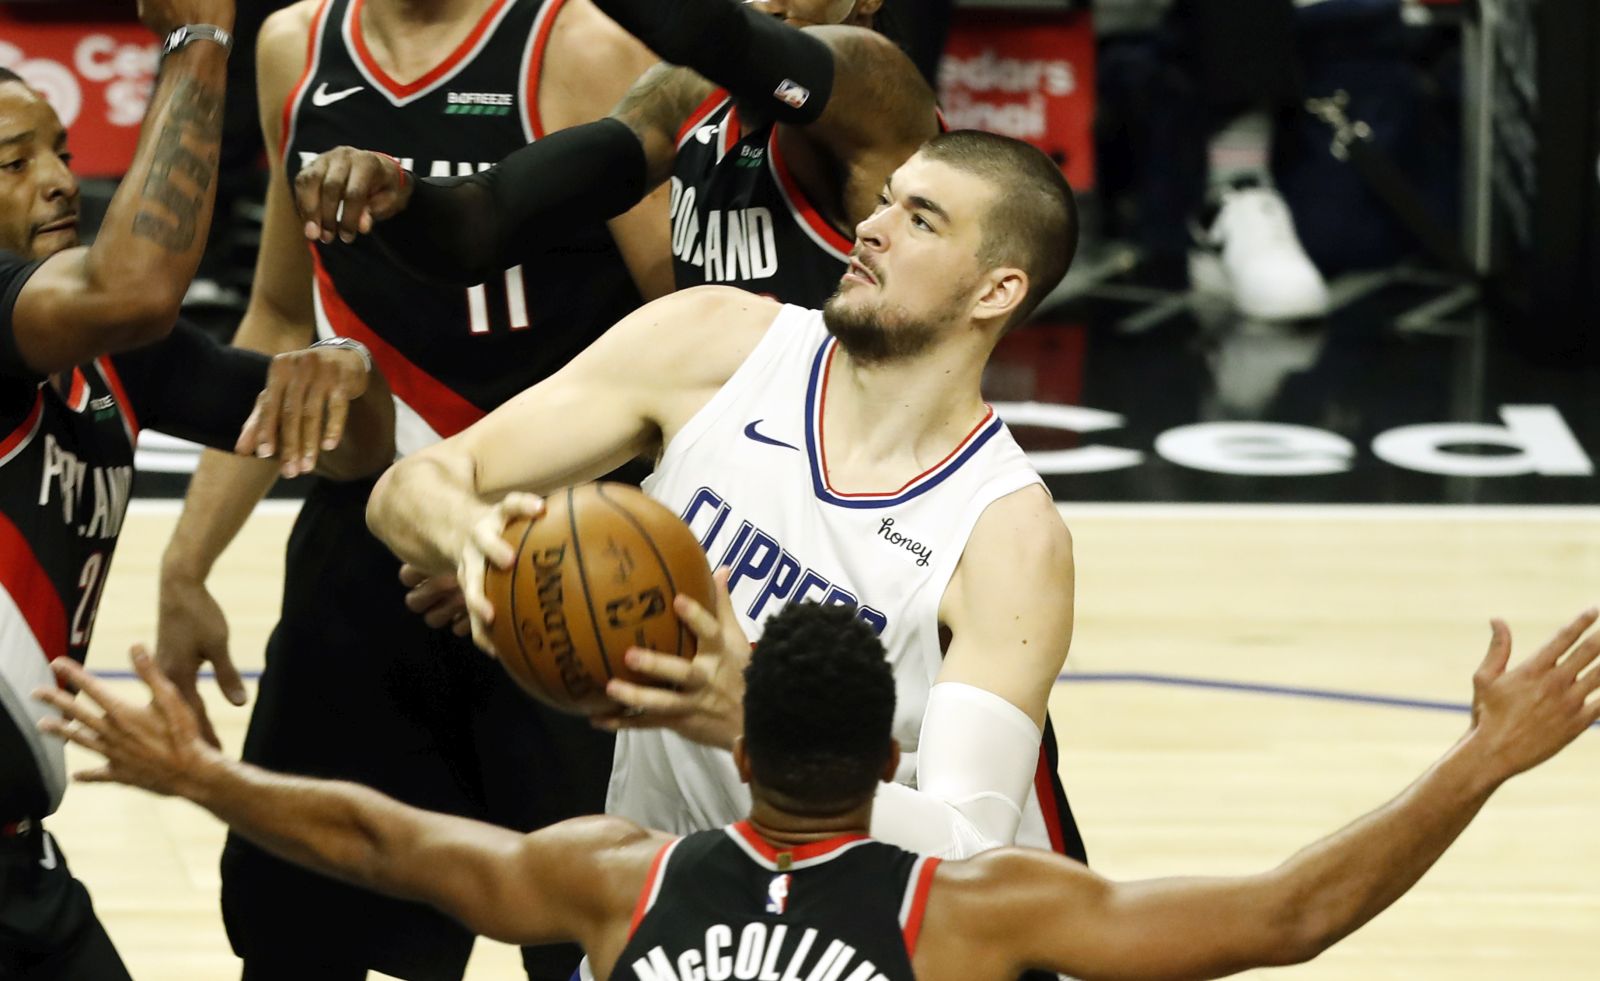 epa09119710 LA Clippers center Ivica Zubac (R) in action during the NBA basketball game between Portland Trail Blazers and Los Angeles Clippers at the Staples Center in Los Angeles, California, USA, 06 April 2021.  EPA/ETIENNE LAURENT SHUTTERSTOCK OUT